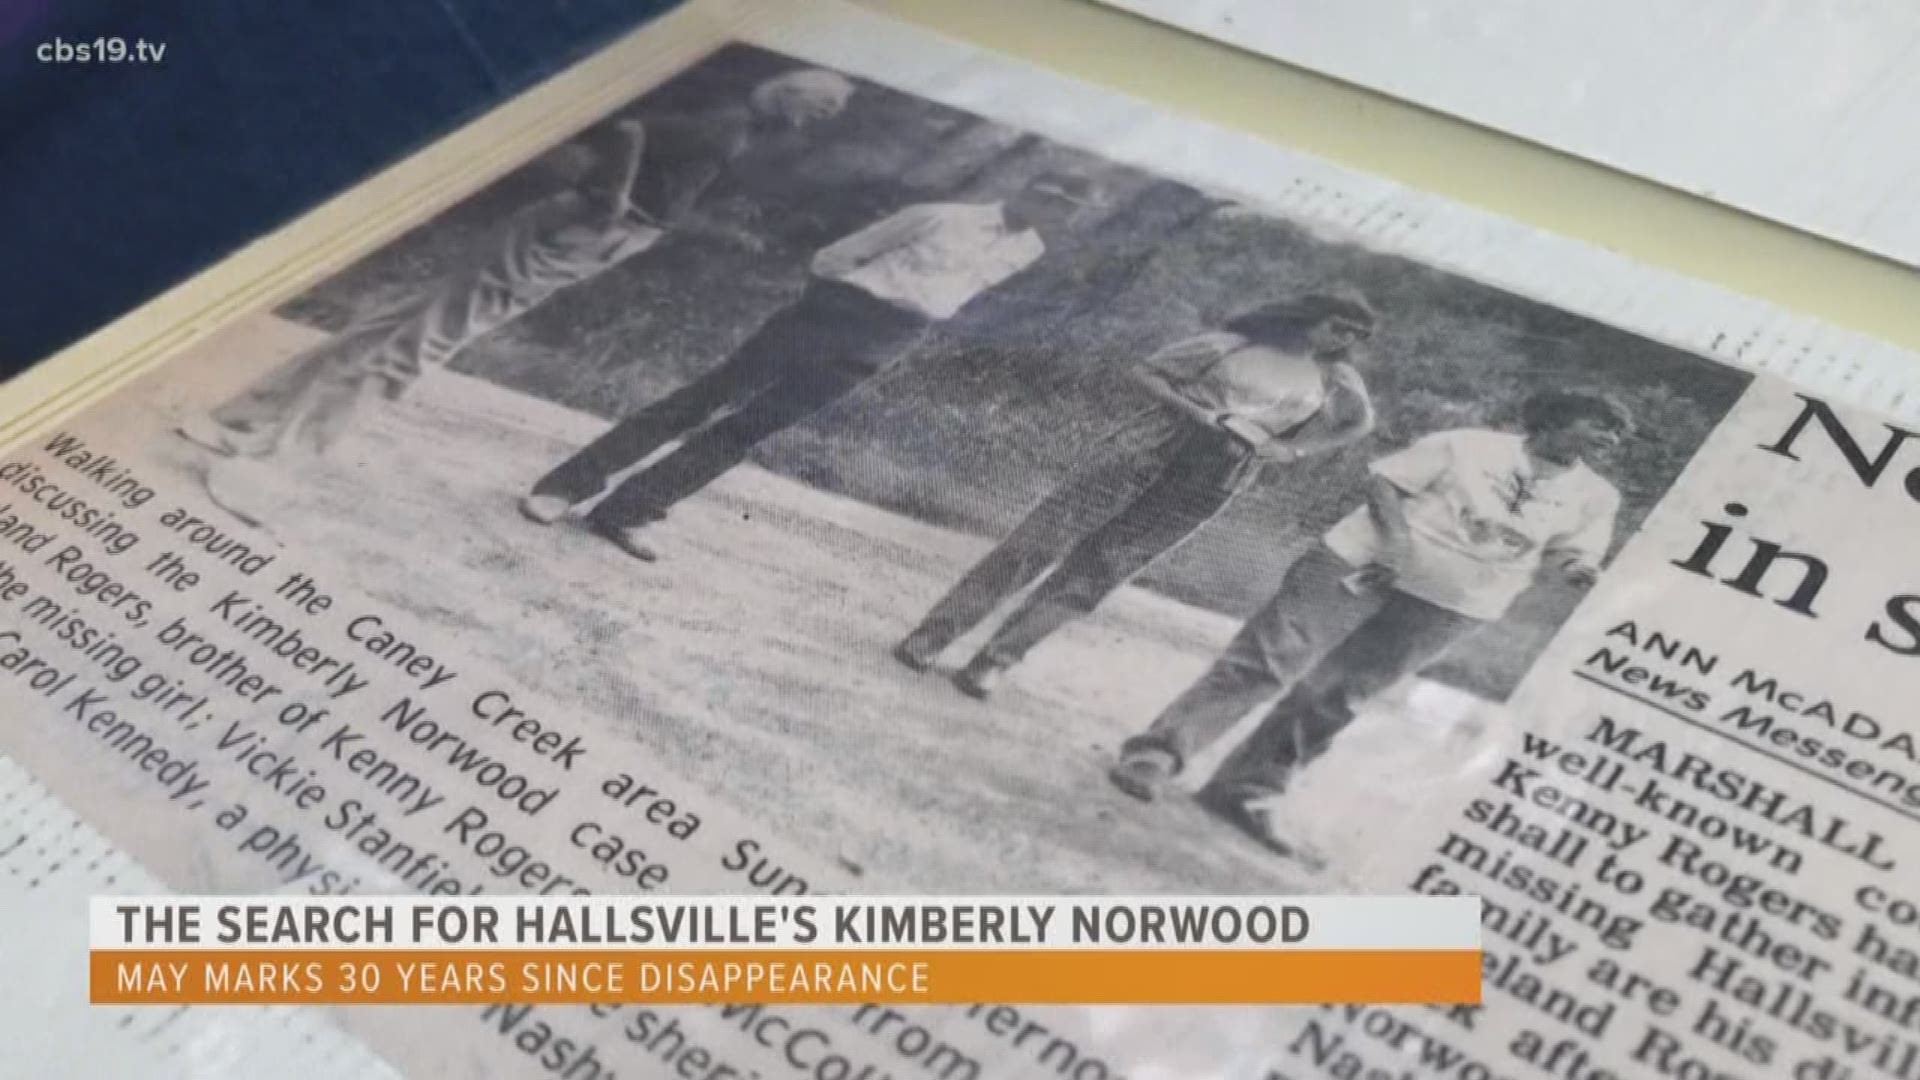 As the month of may comes to an end, we're telling part two of Kimberly Norwood's story. 
This month a milestone in the search for the girl from Hallsville. On May 20 1989, after their daughter never returned home, the then 12 years old's parents started desperately trying to find any signs of where she might be.